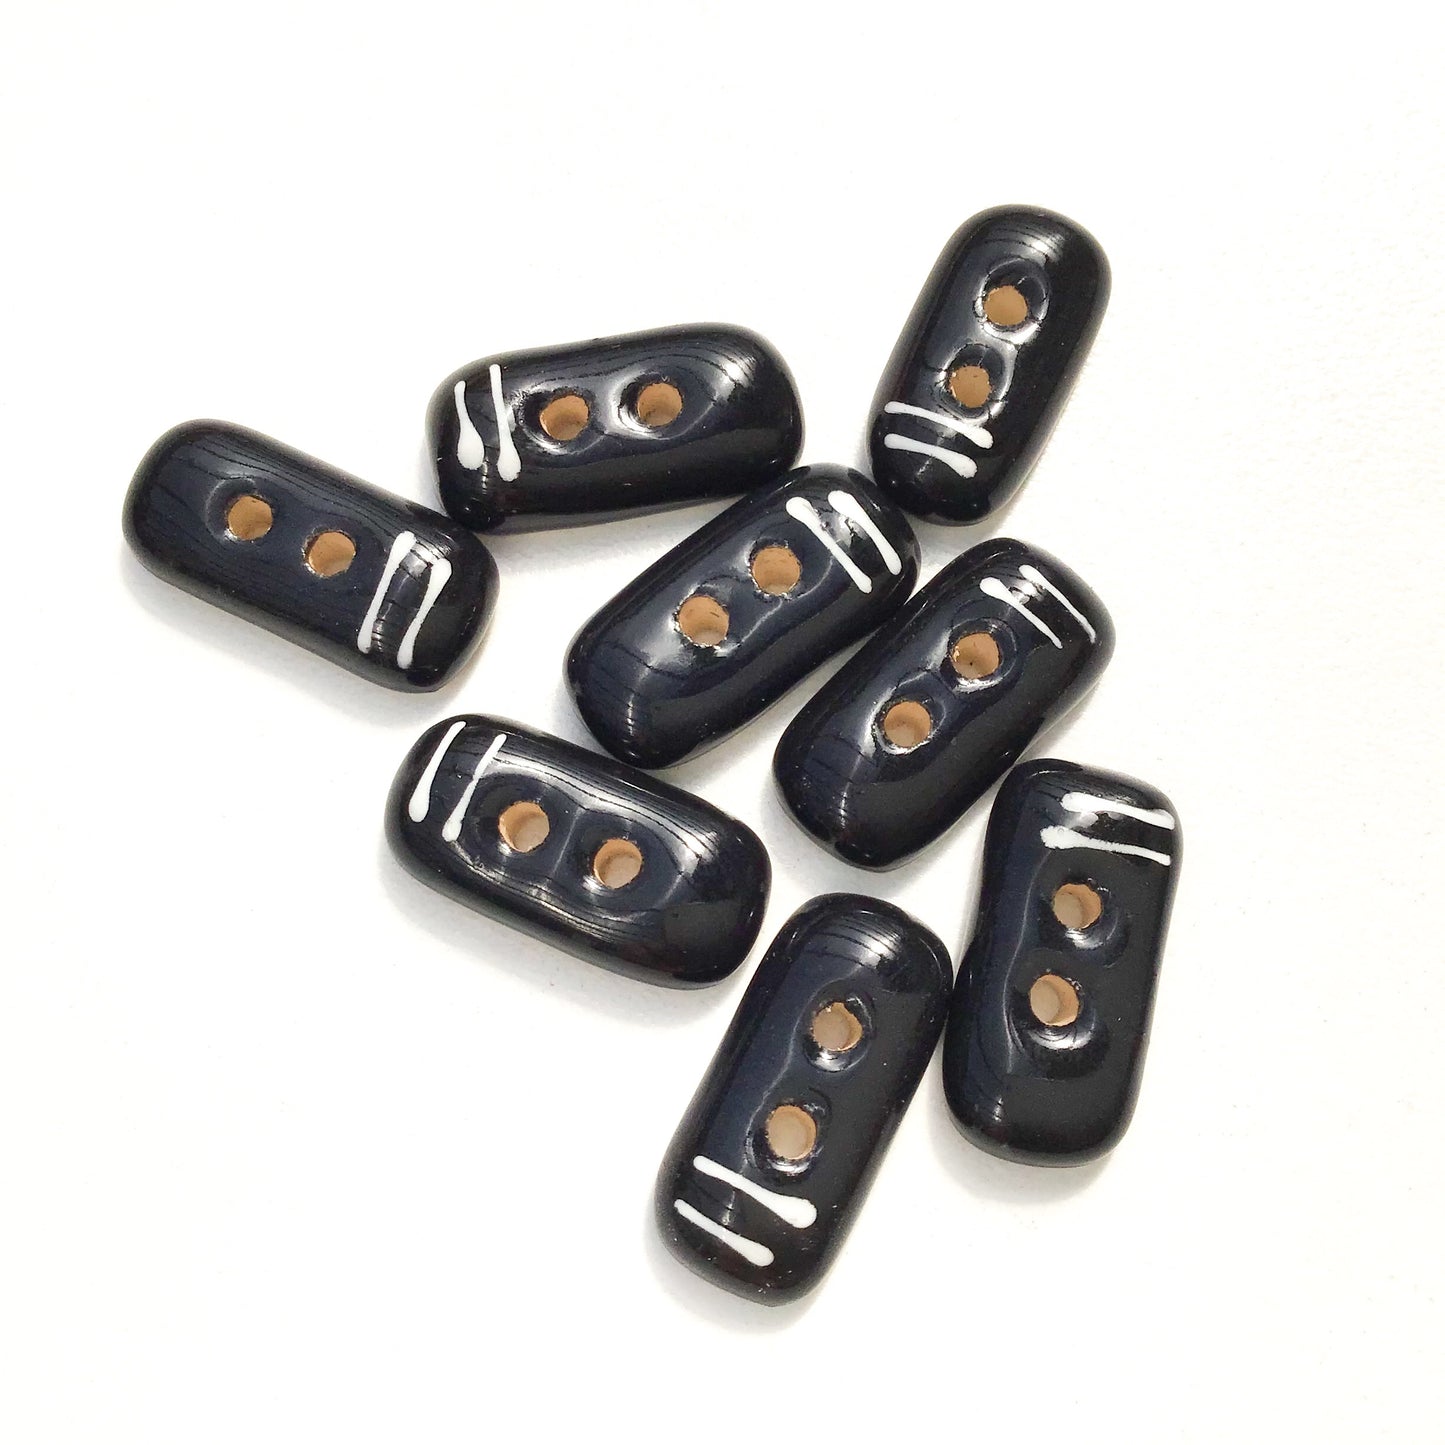 Rectangular Black Ceramic Buttons with White Lines - Black Clay Buttons - 3/8" x 3/4" - 8 Pack